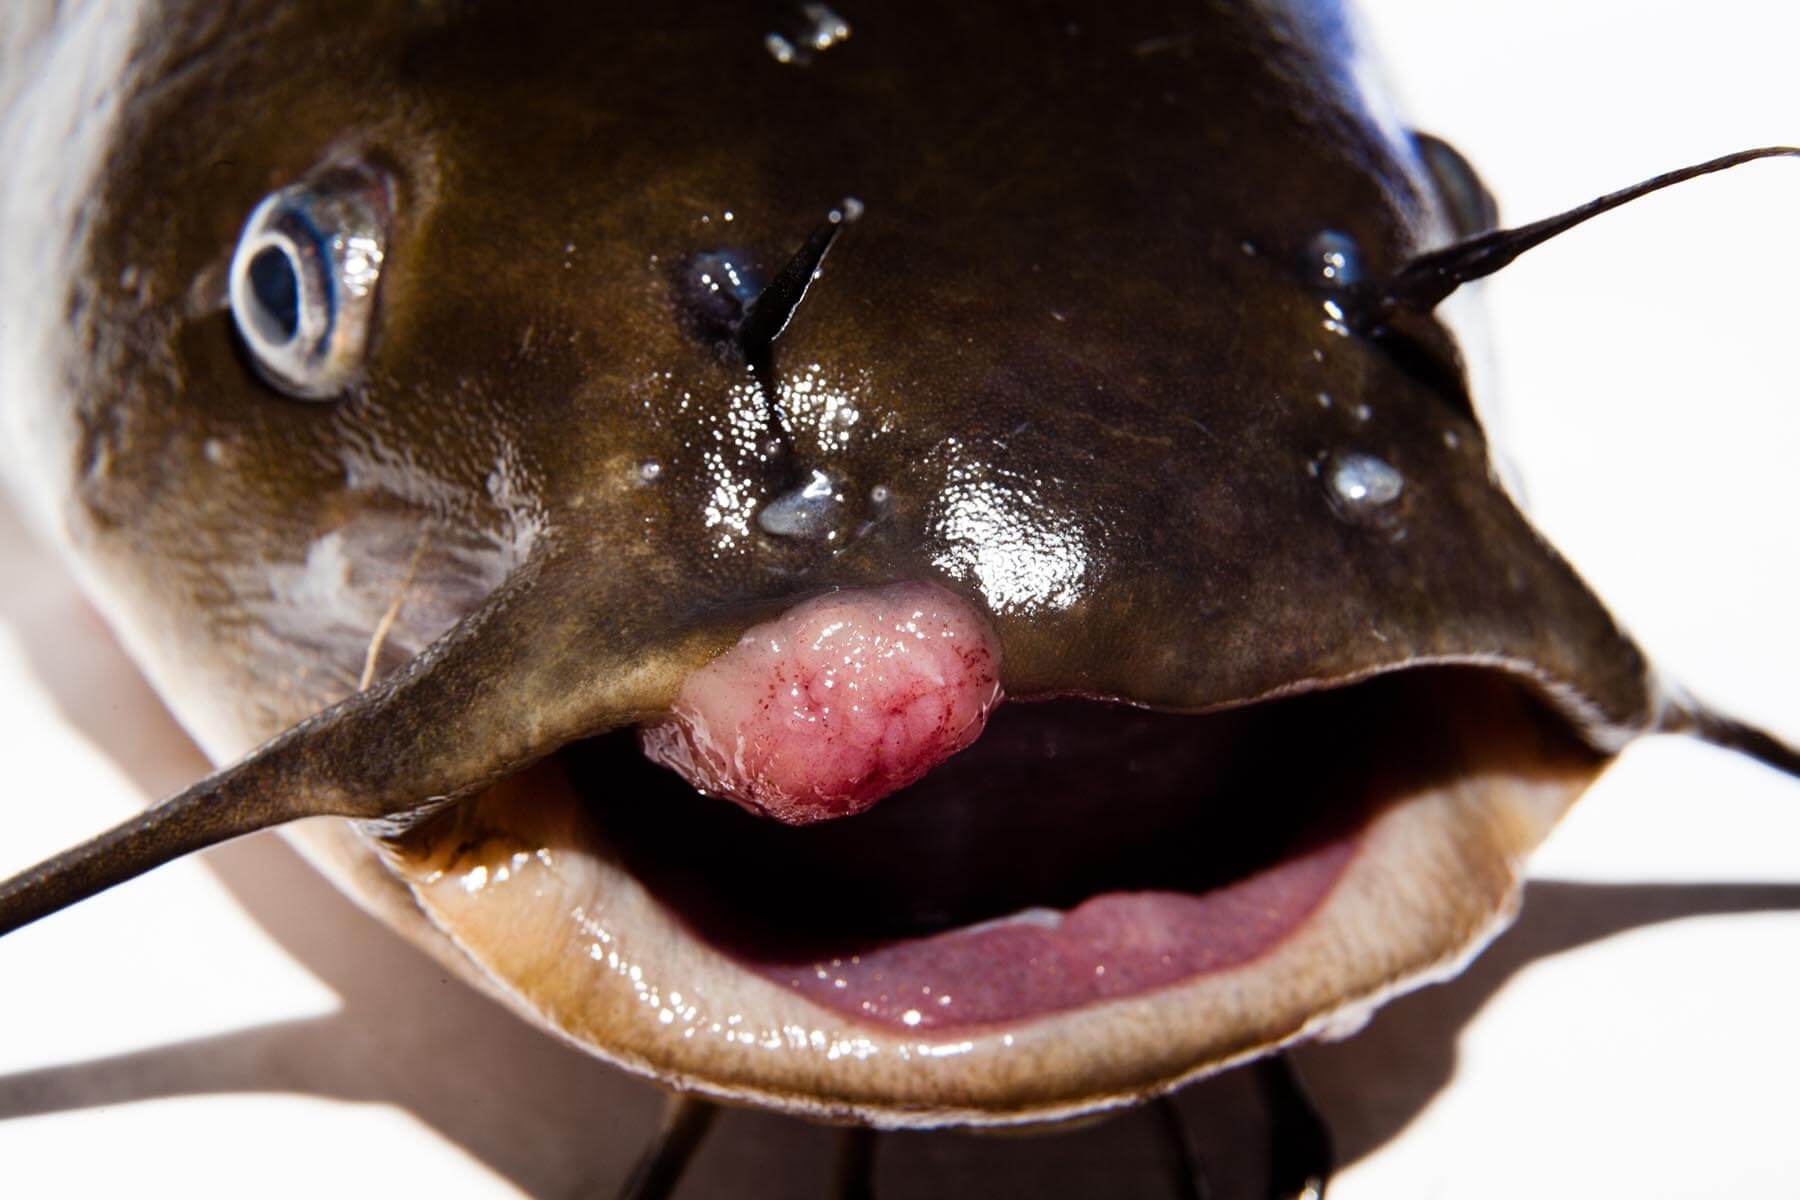 A fish with a skin tumor on its mouth from chemical contaminant infection.